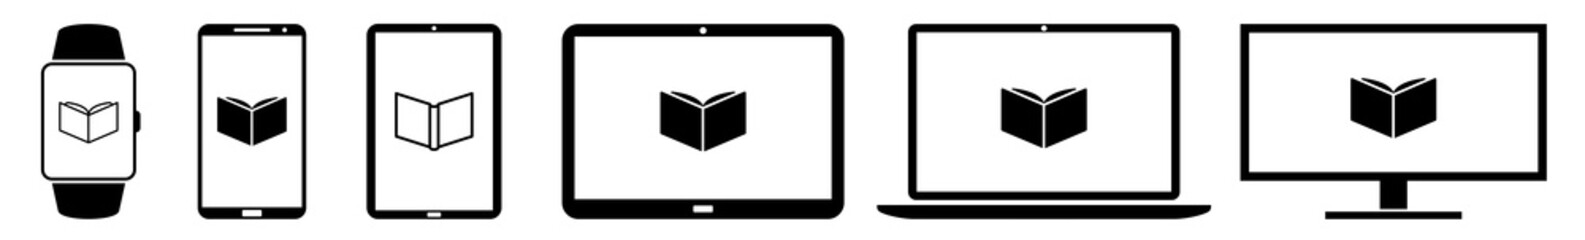 Display Book Education Reading Learning Read Icon Devices Set | Web Screen Learn Study Educate Device Online | Laptop Vector Illustration | Mobile Phone | PC Computer Smartphone Tablet Sign Isolated